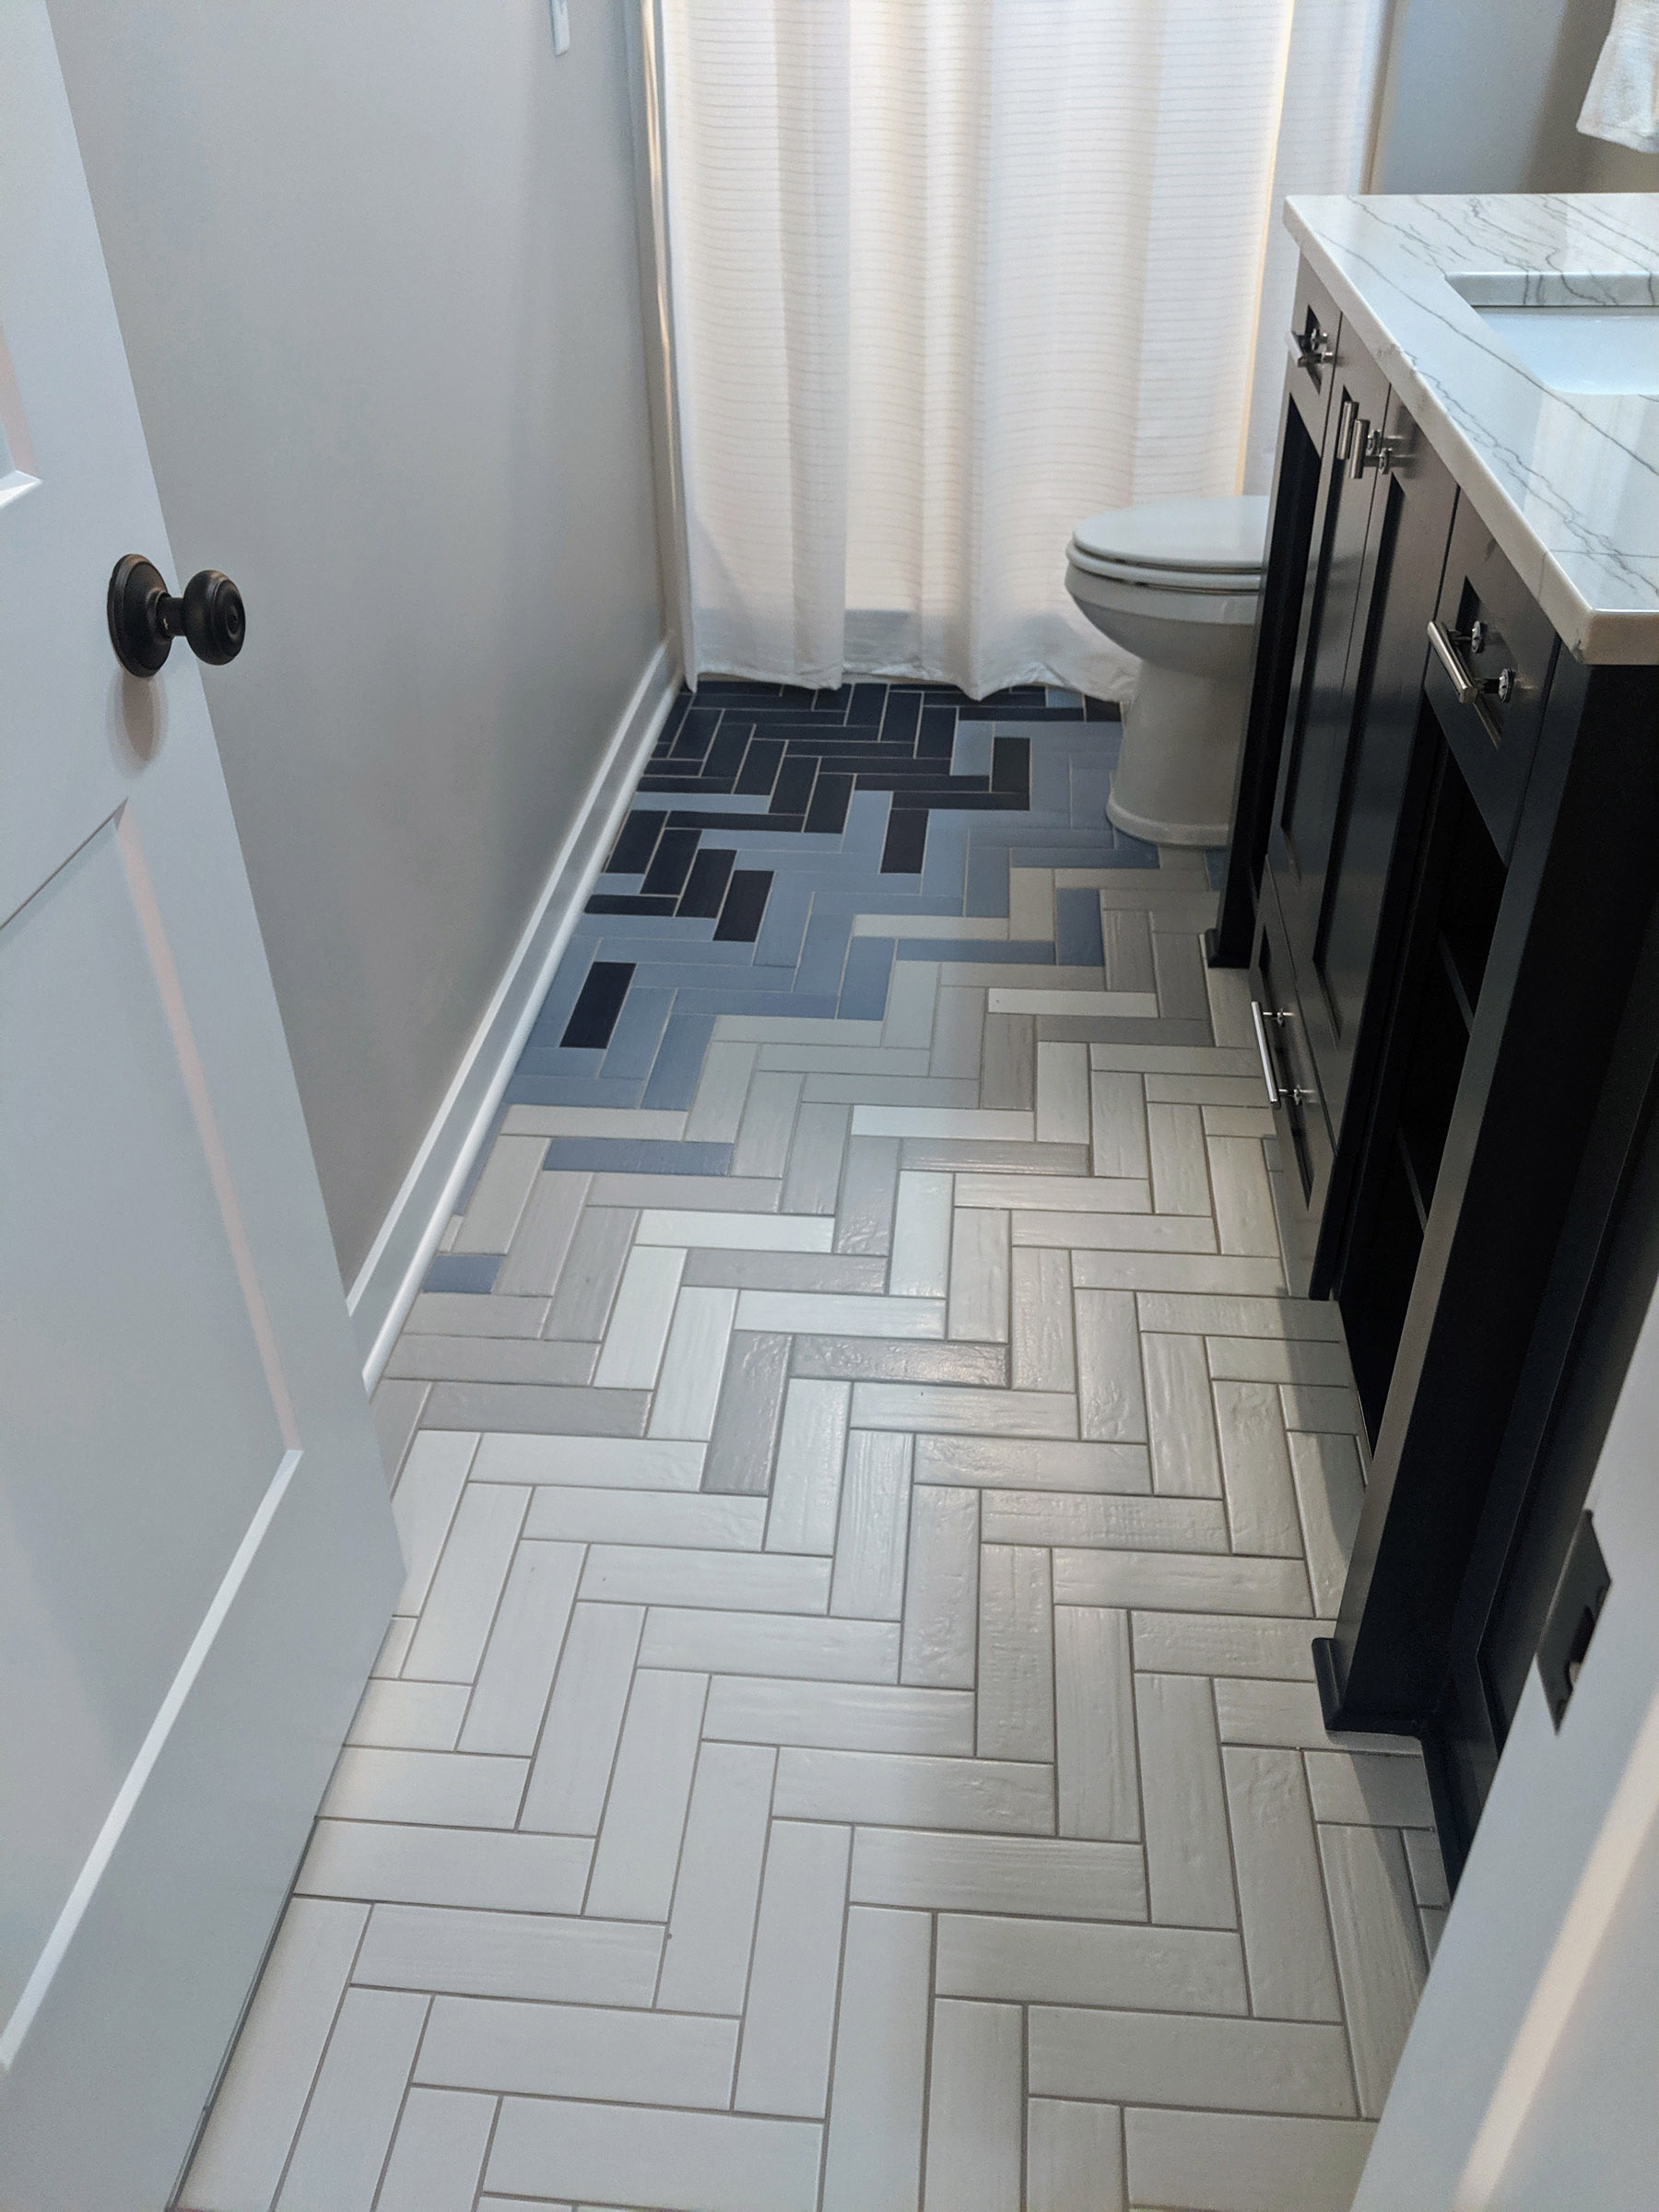 Herringbone tile pattern @ the ¾ bath with bleeding transfer of 4-colored tiles, brings a unique style to an otherwise boring bathroom tile